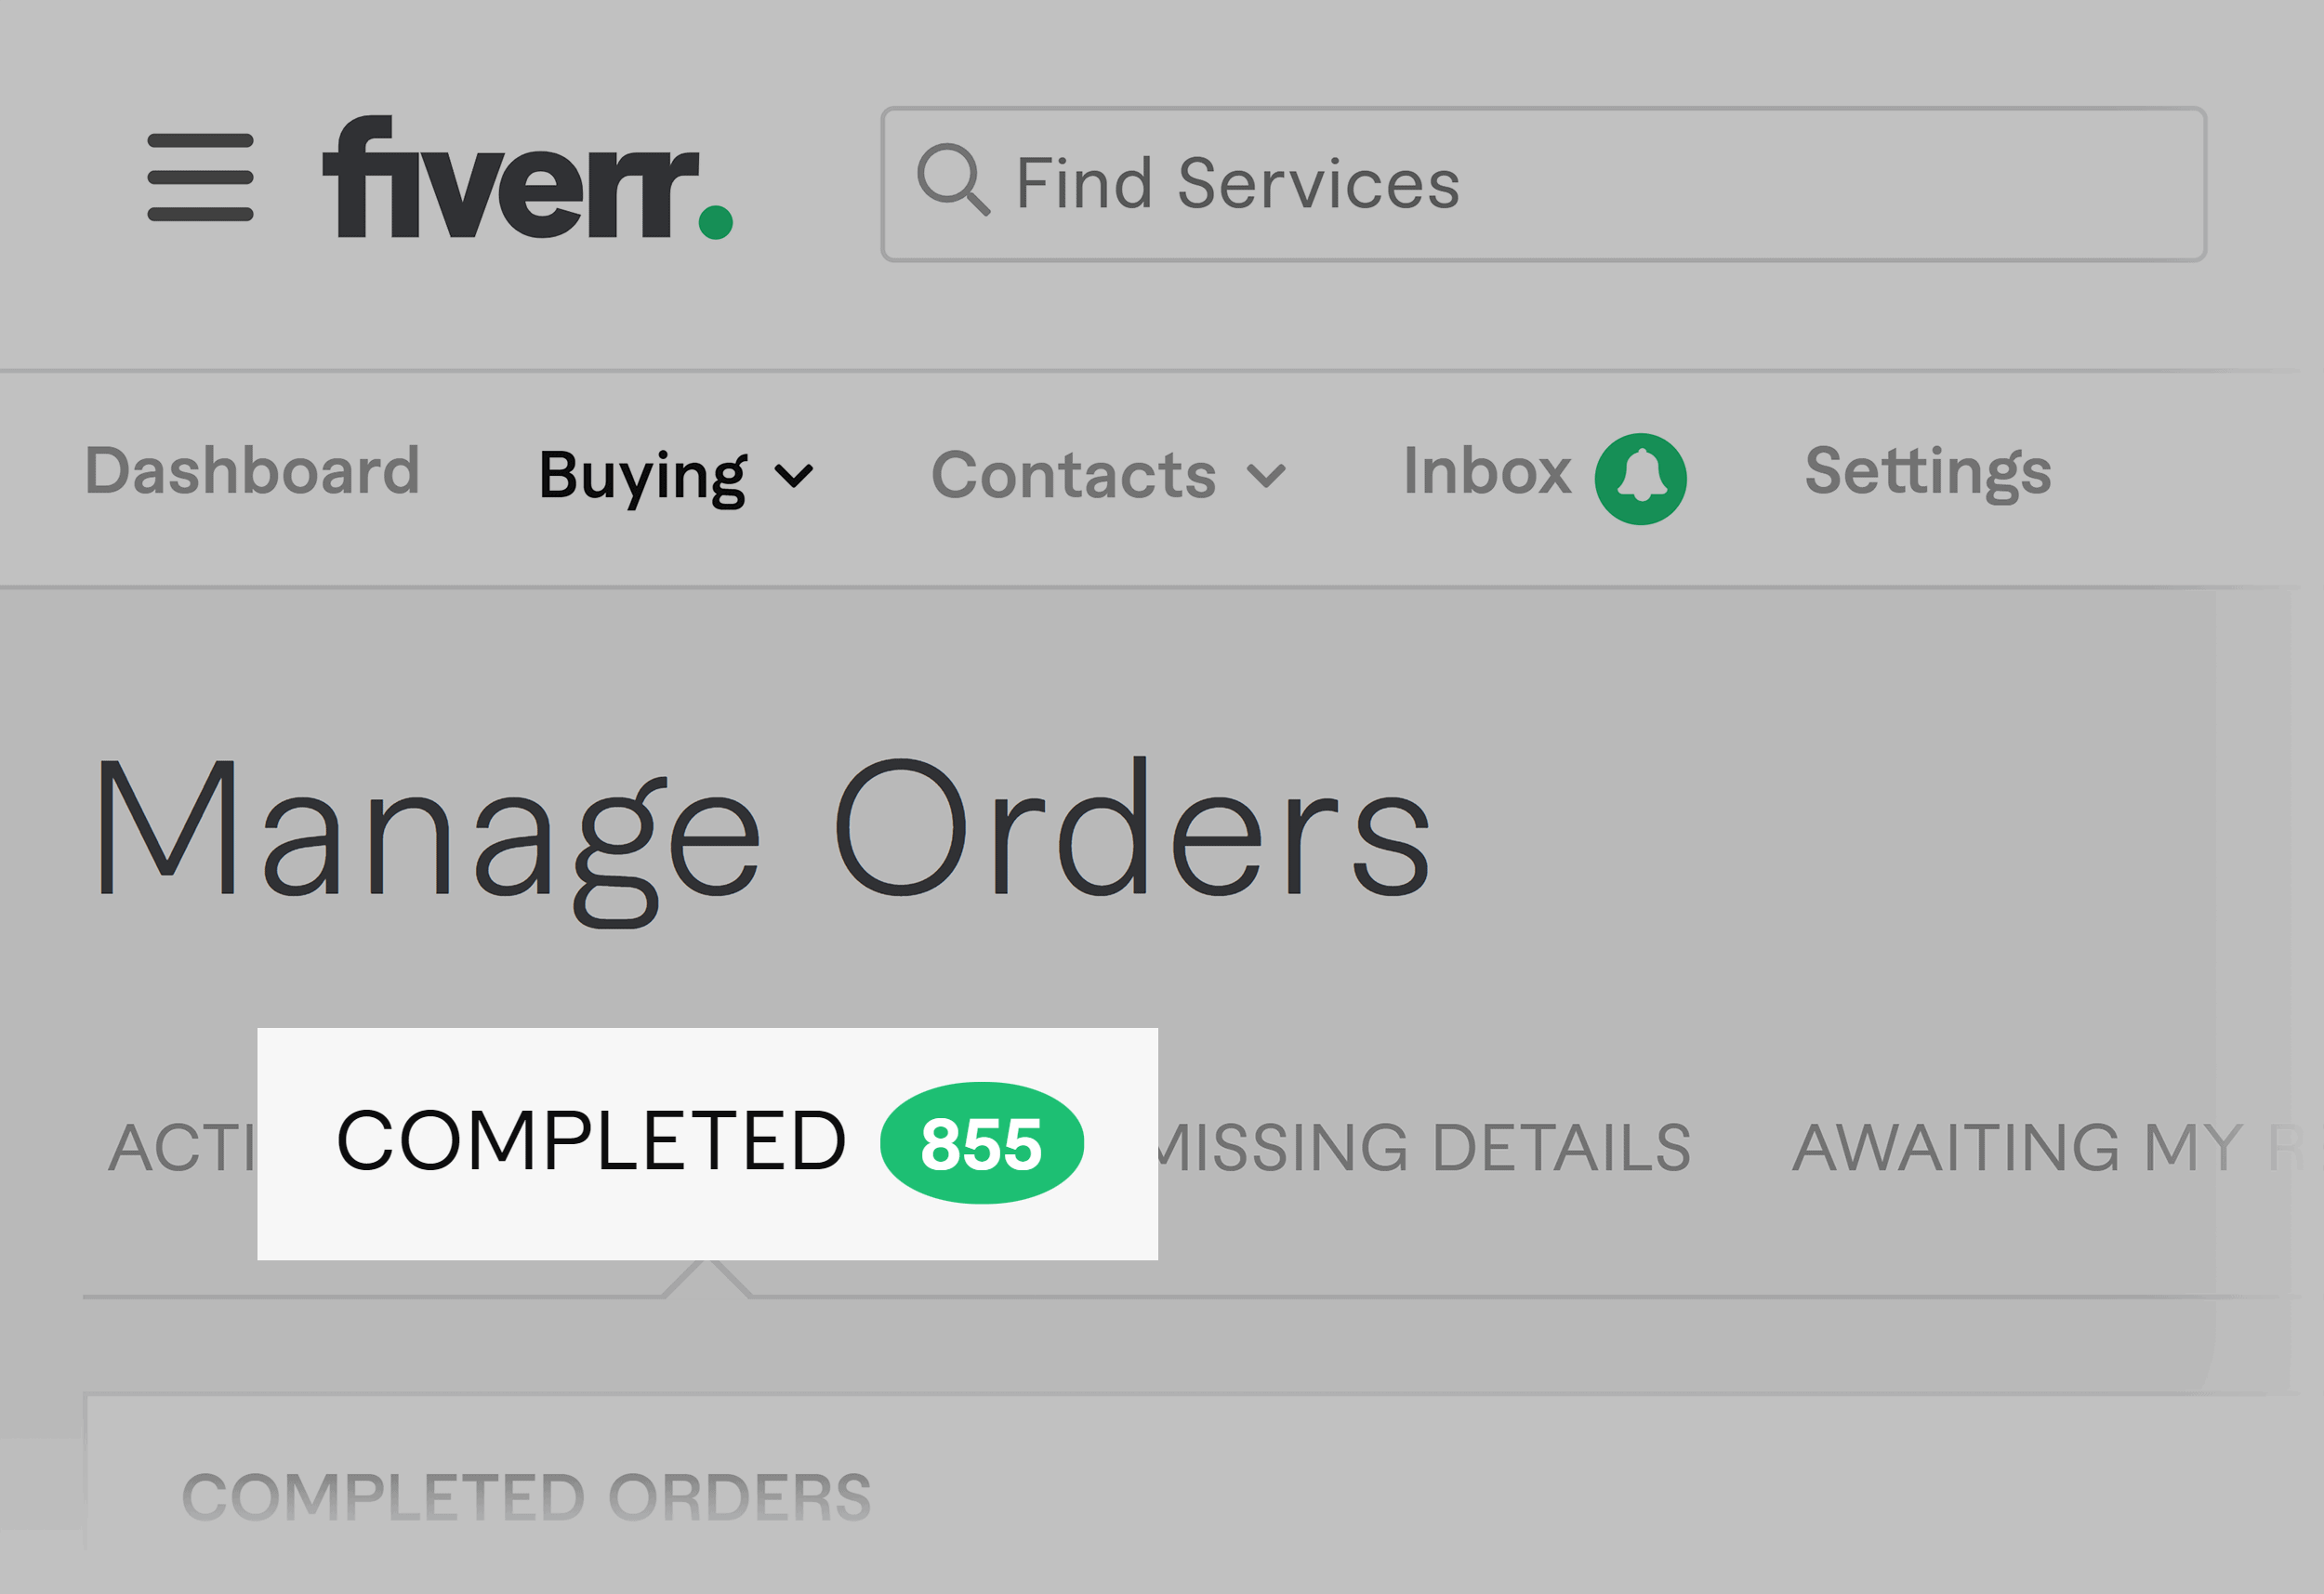 Fiverr – Completed orders